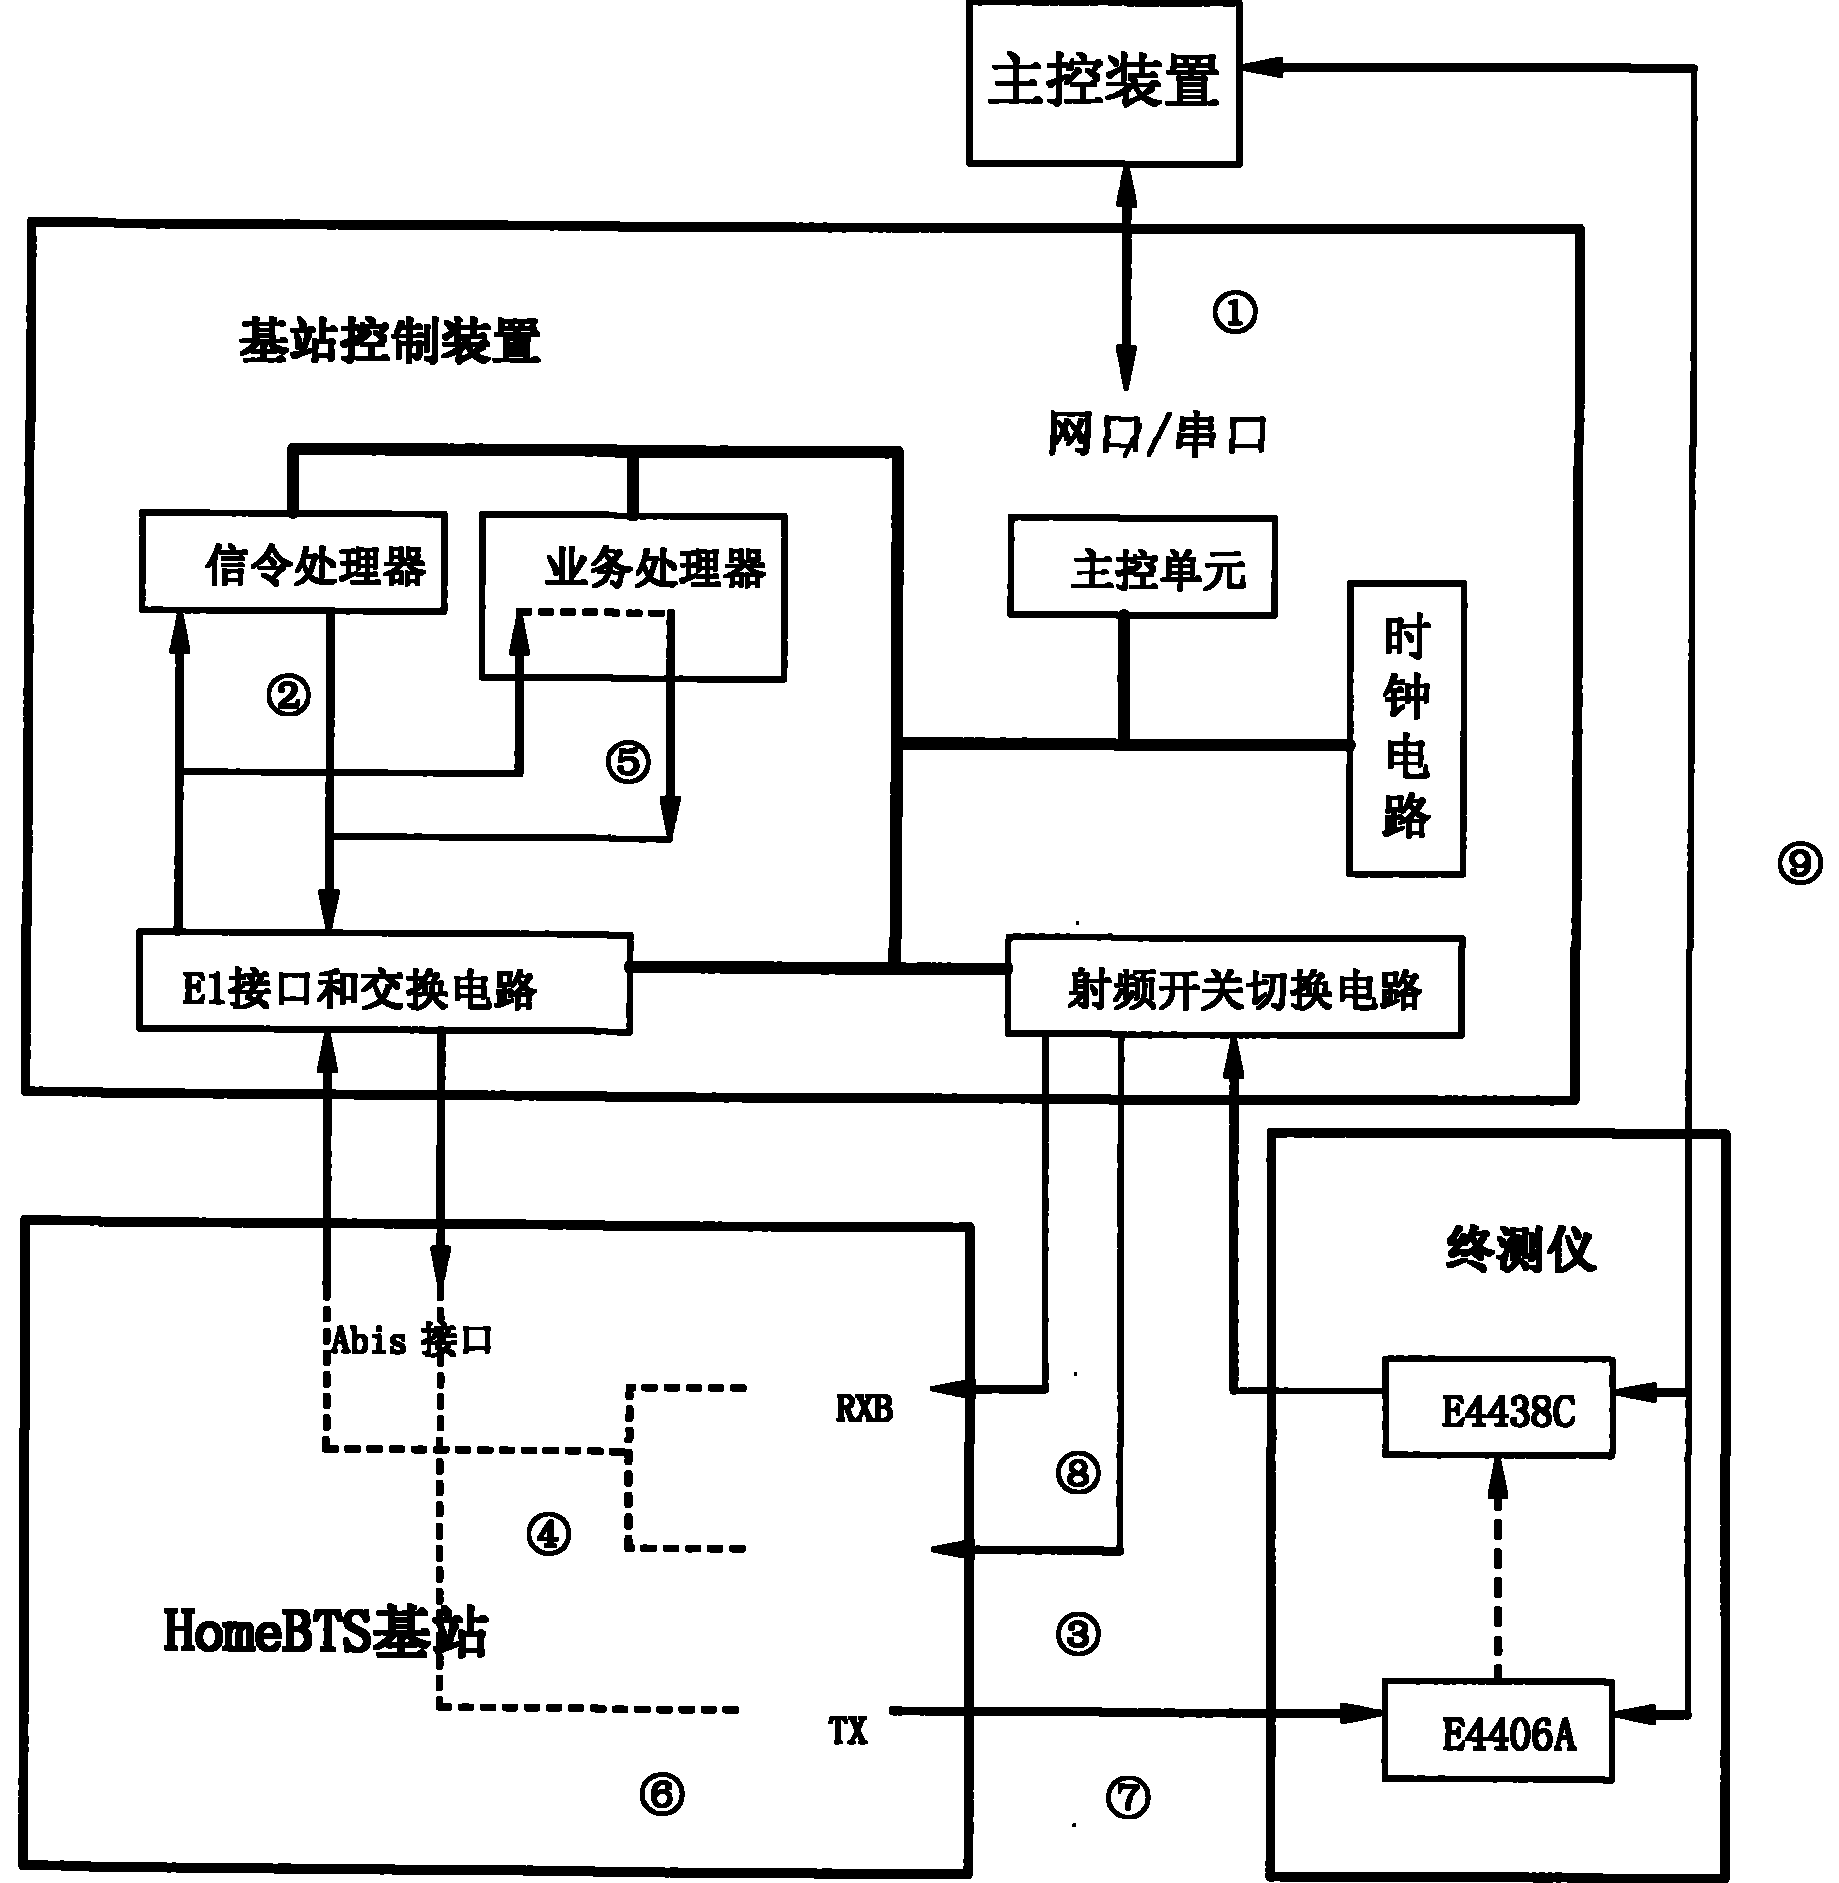 Complete machine automatic test equipment and method of global mobile communication system base station